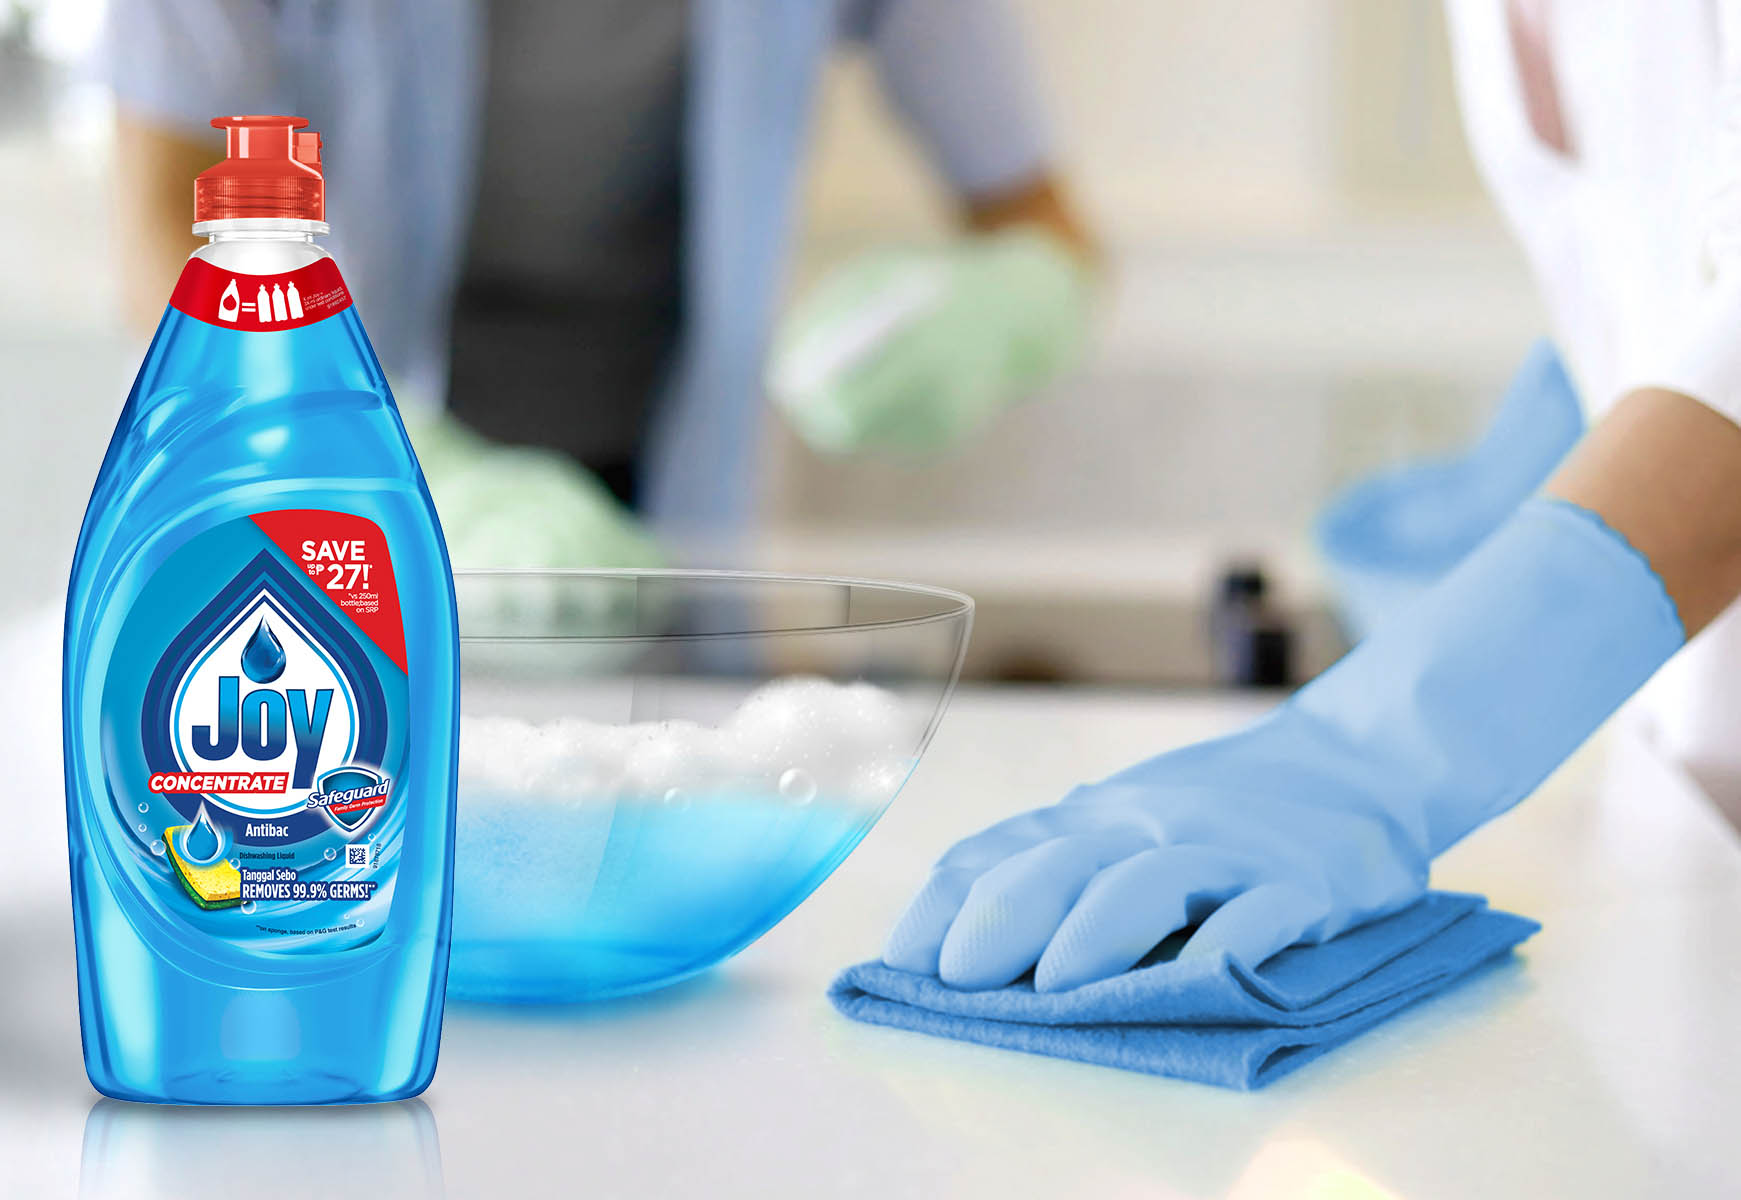 New research found some dishwashing liquids can be an effective home disinfectant